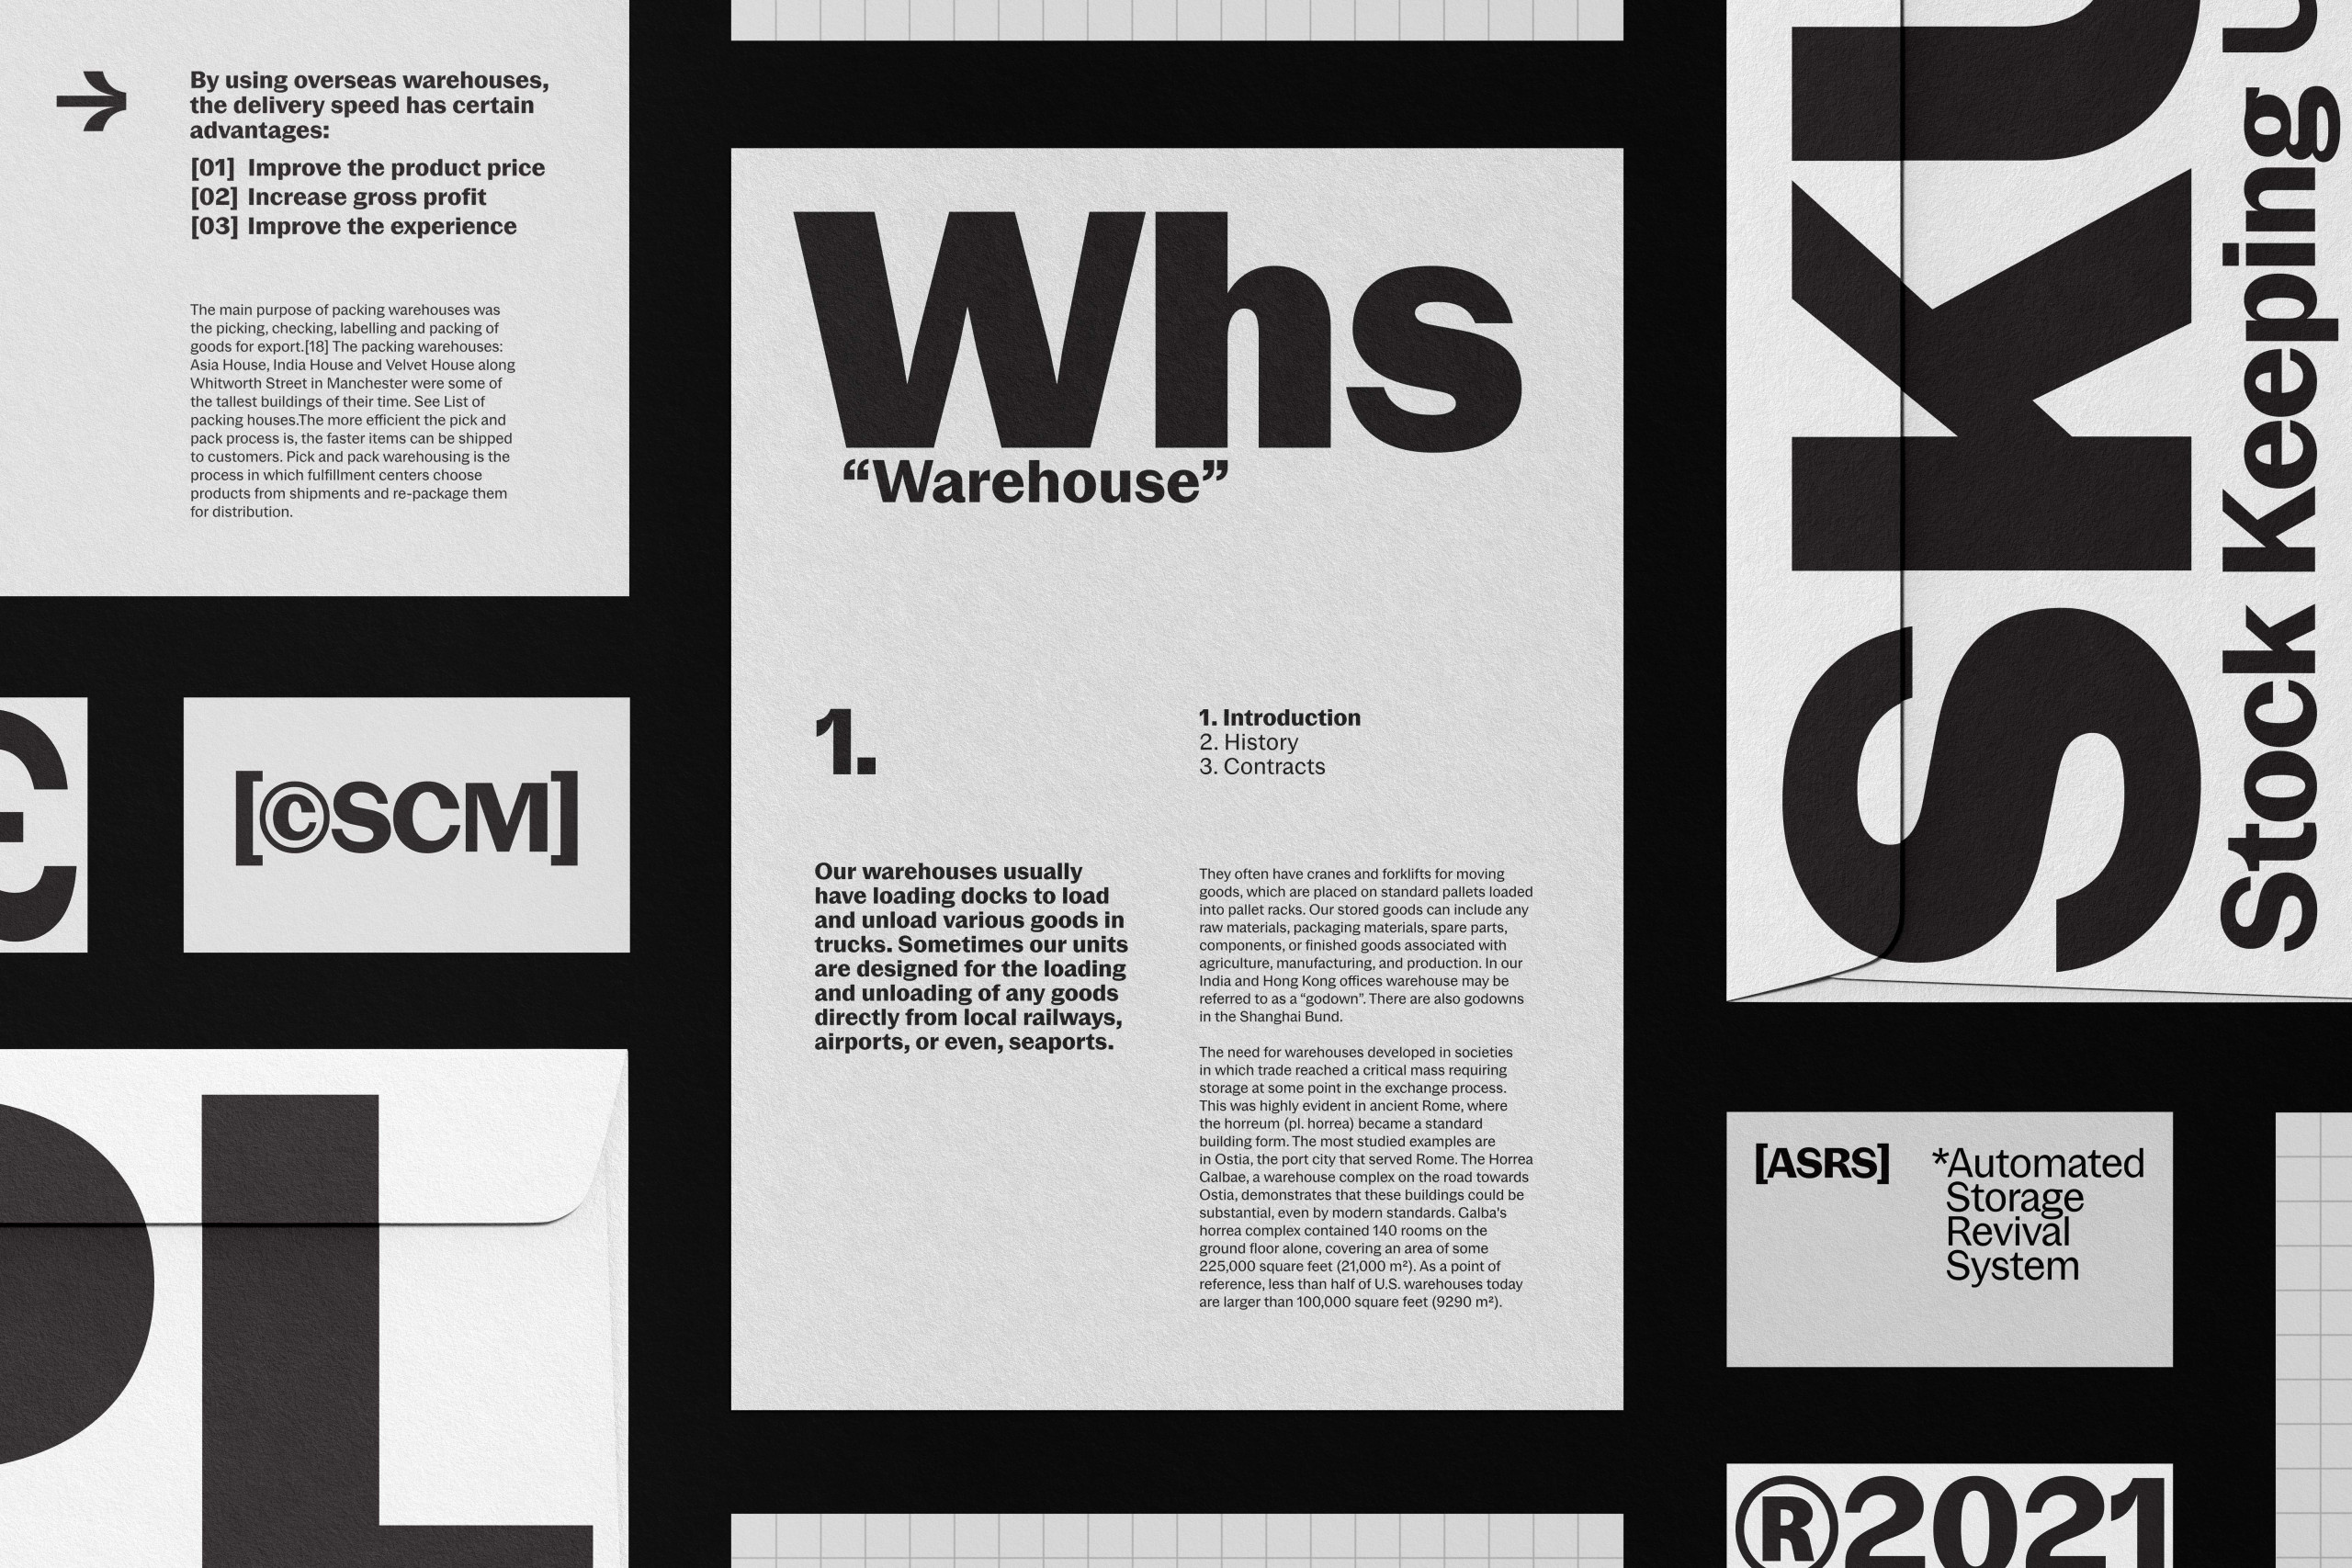 Monochrome typographic poster design featuring bold lettering, warehouse theme, with text and layout elements for graphics category.